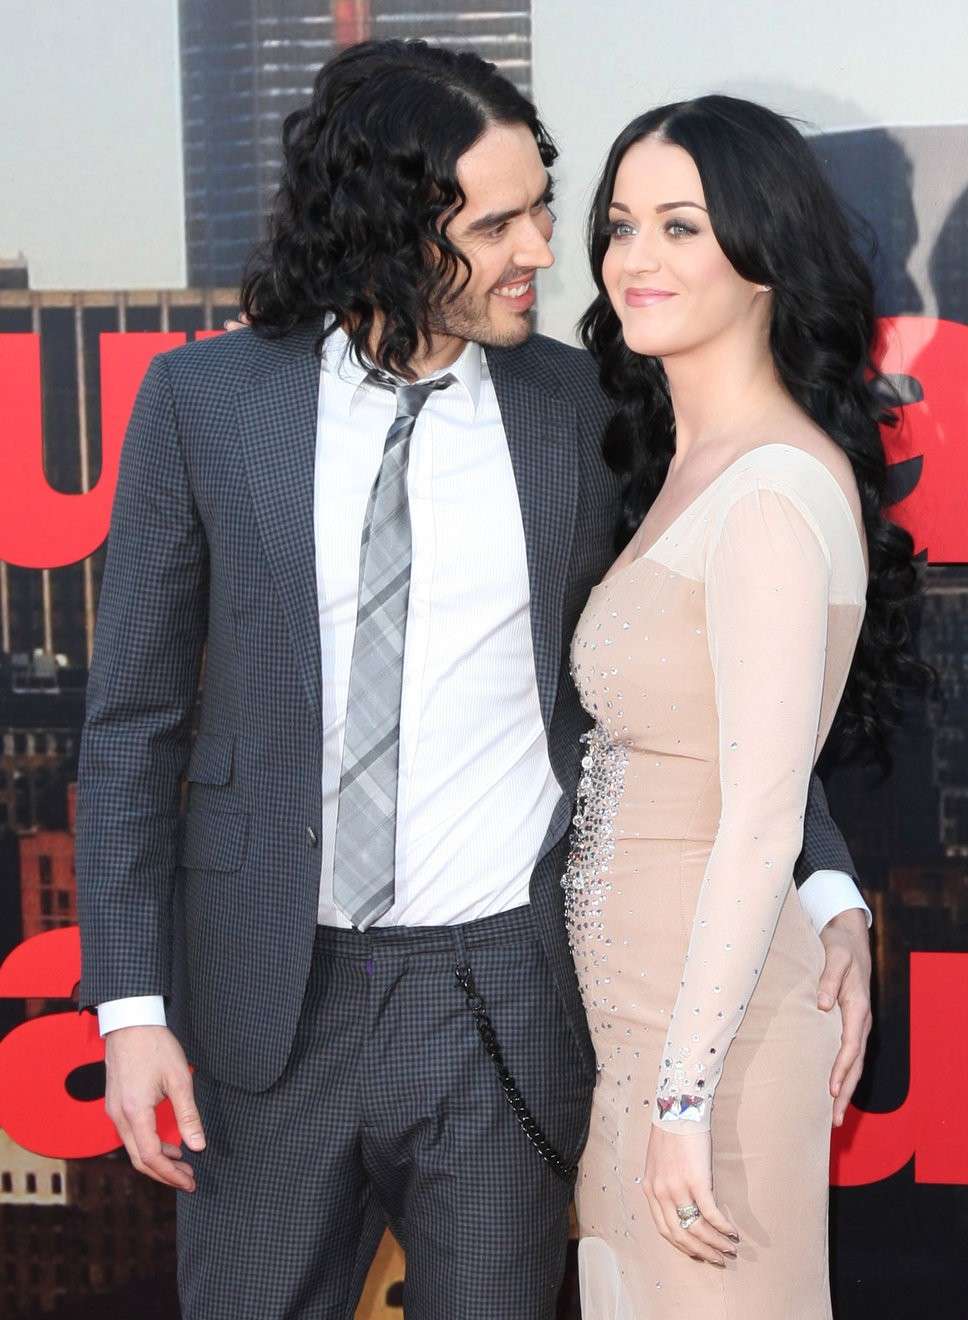 Katy Perry con Russel Brand